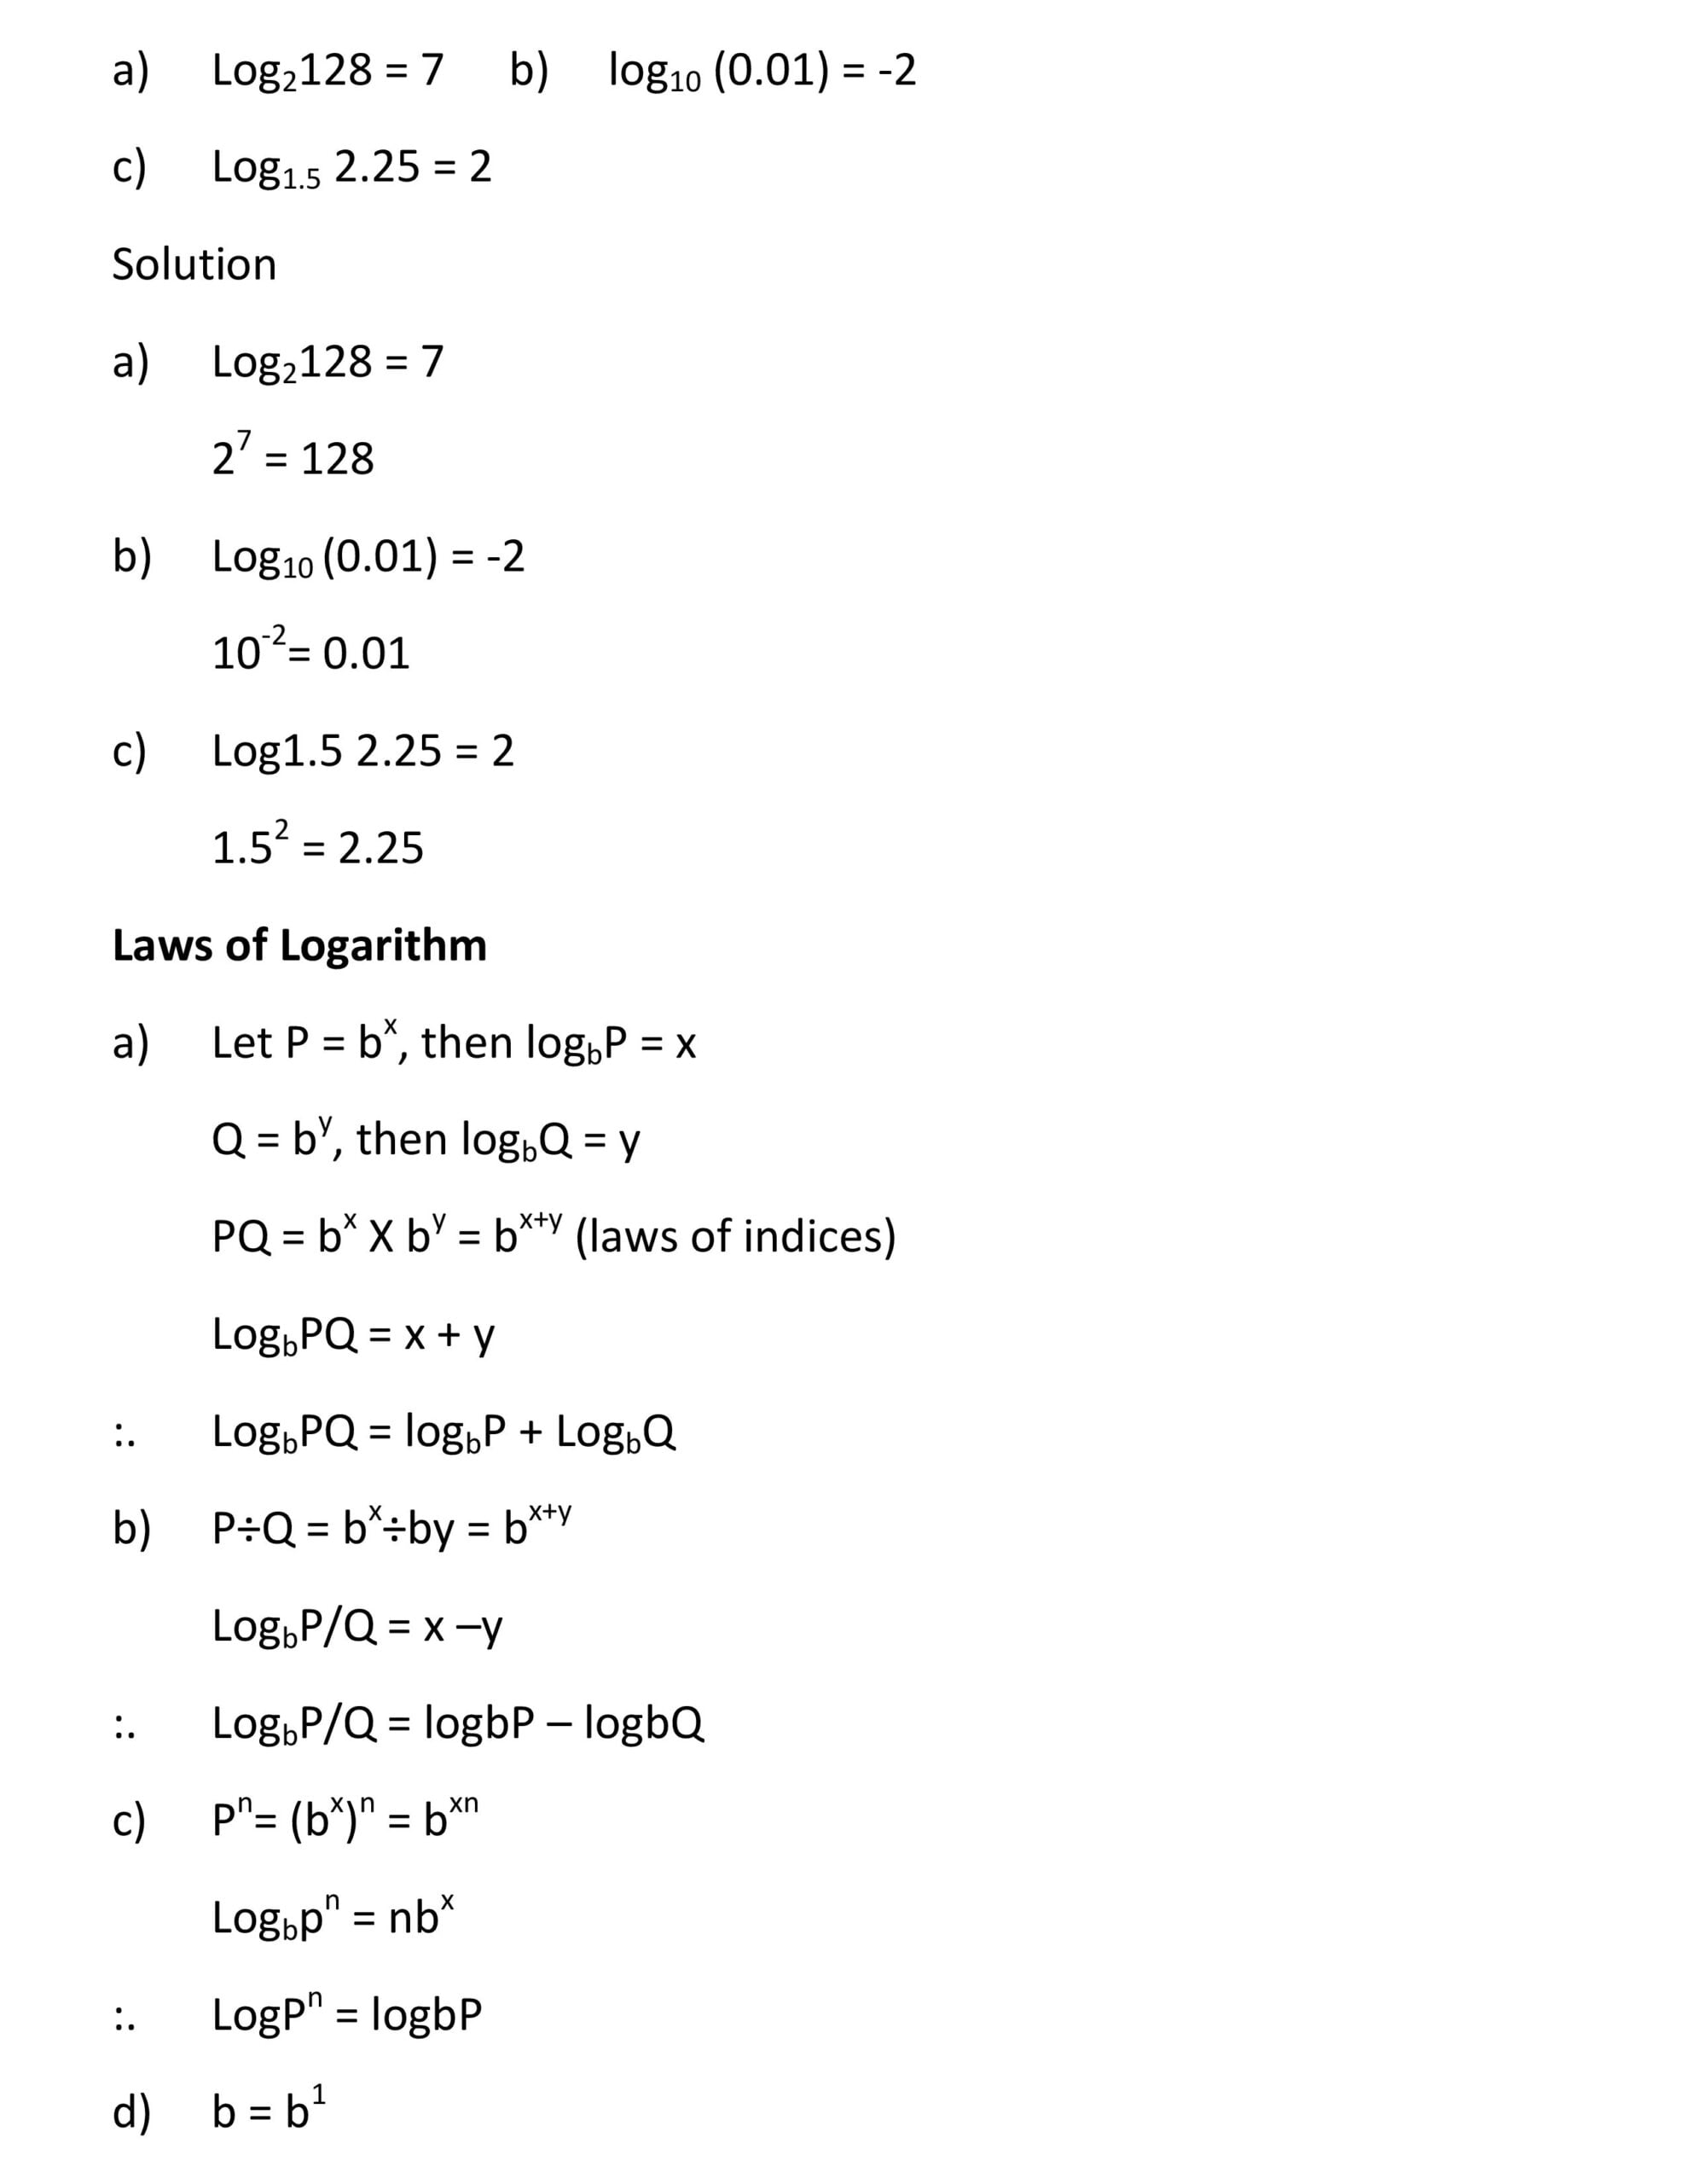 LOGARITHM- SOLVING PROBLEMS BASED ON LAWS OF LOGARITHM_2